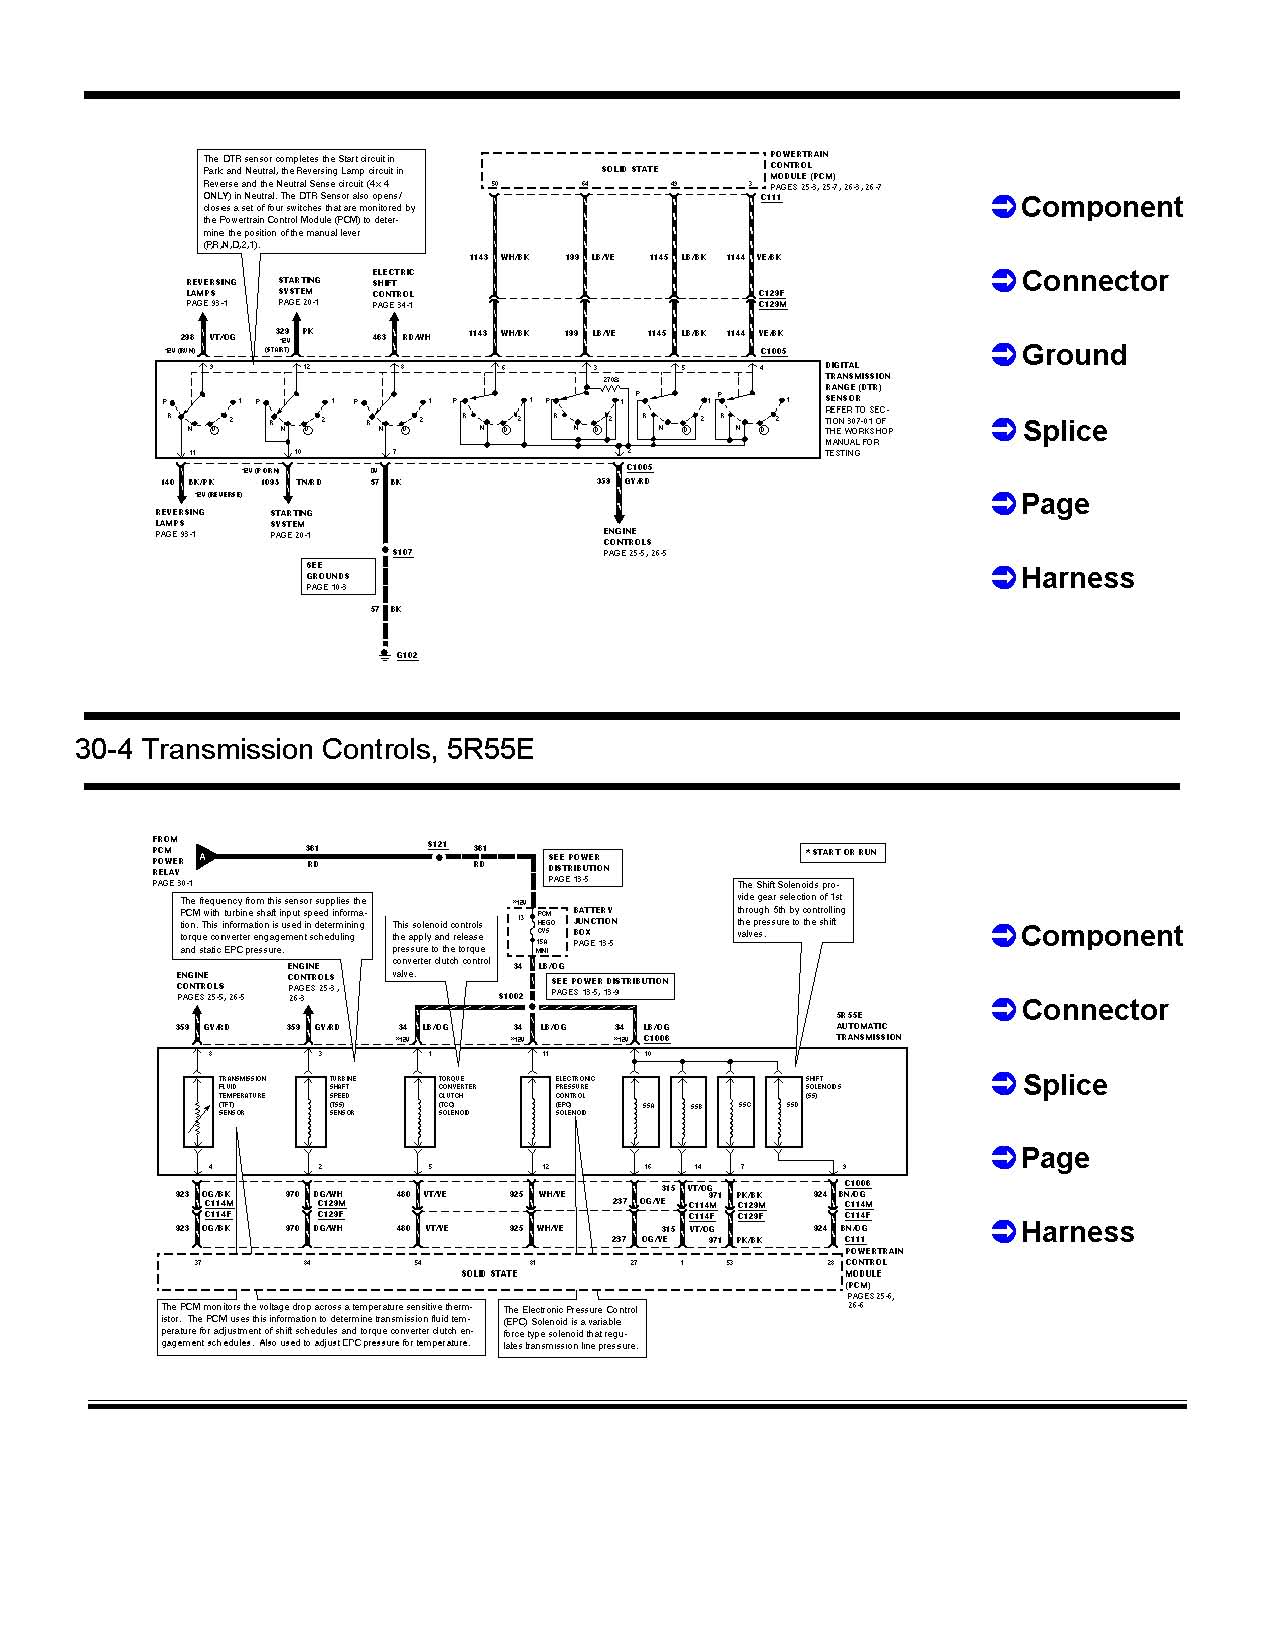 Transmission wiring. - Ranger-Forums - The Ultimate Ford Ranger Resource 99 Ford Ranger Wiring Diagram Ranger-Forums